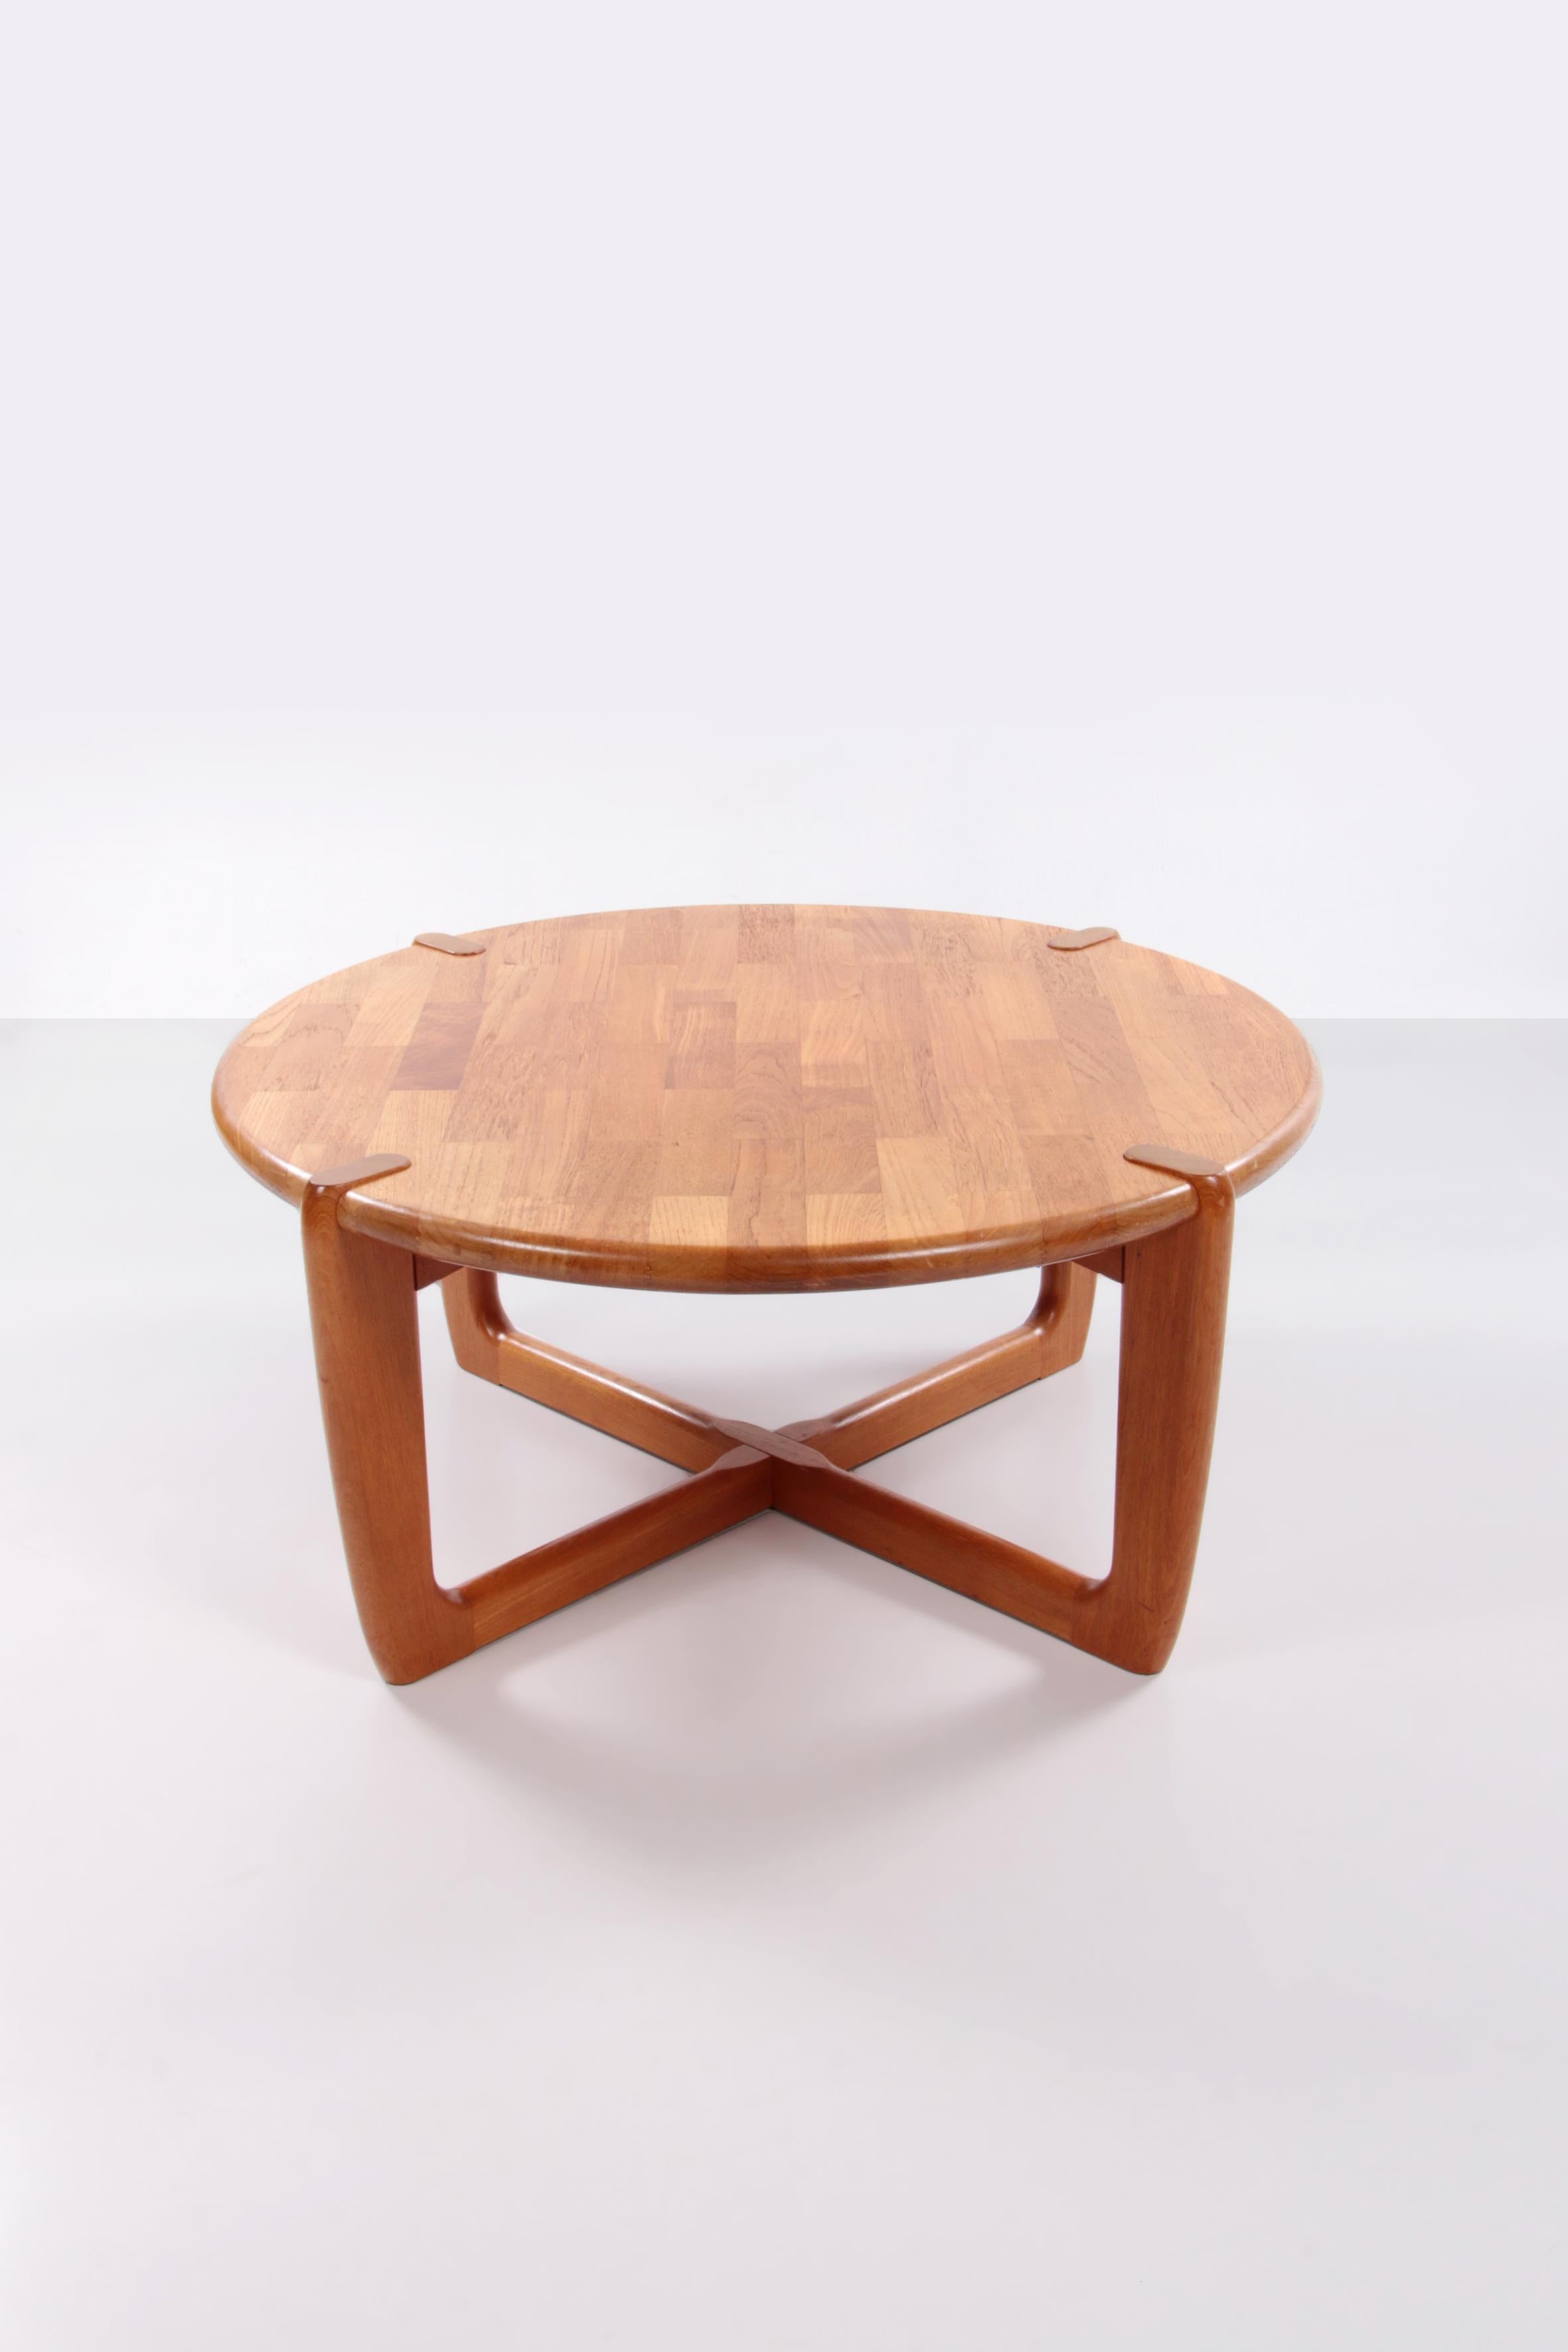 Danish design coffee table by Niels Bach, 1970s


Round coffee table by designer Niels Bach in solid teak, consisting of a thick top with a rounded edge. The blade has four notches where the rectangular support legs are placed.

Produced in